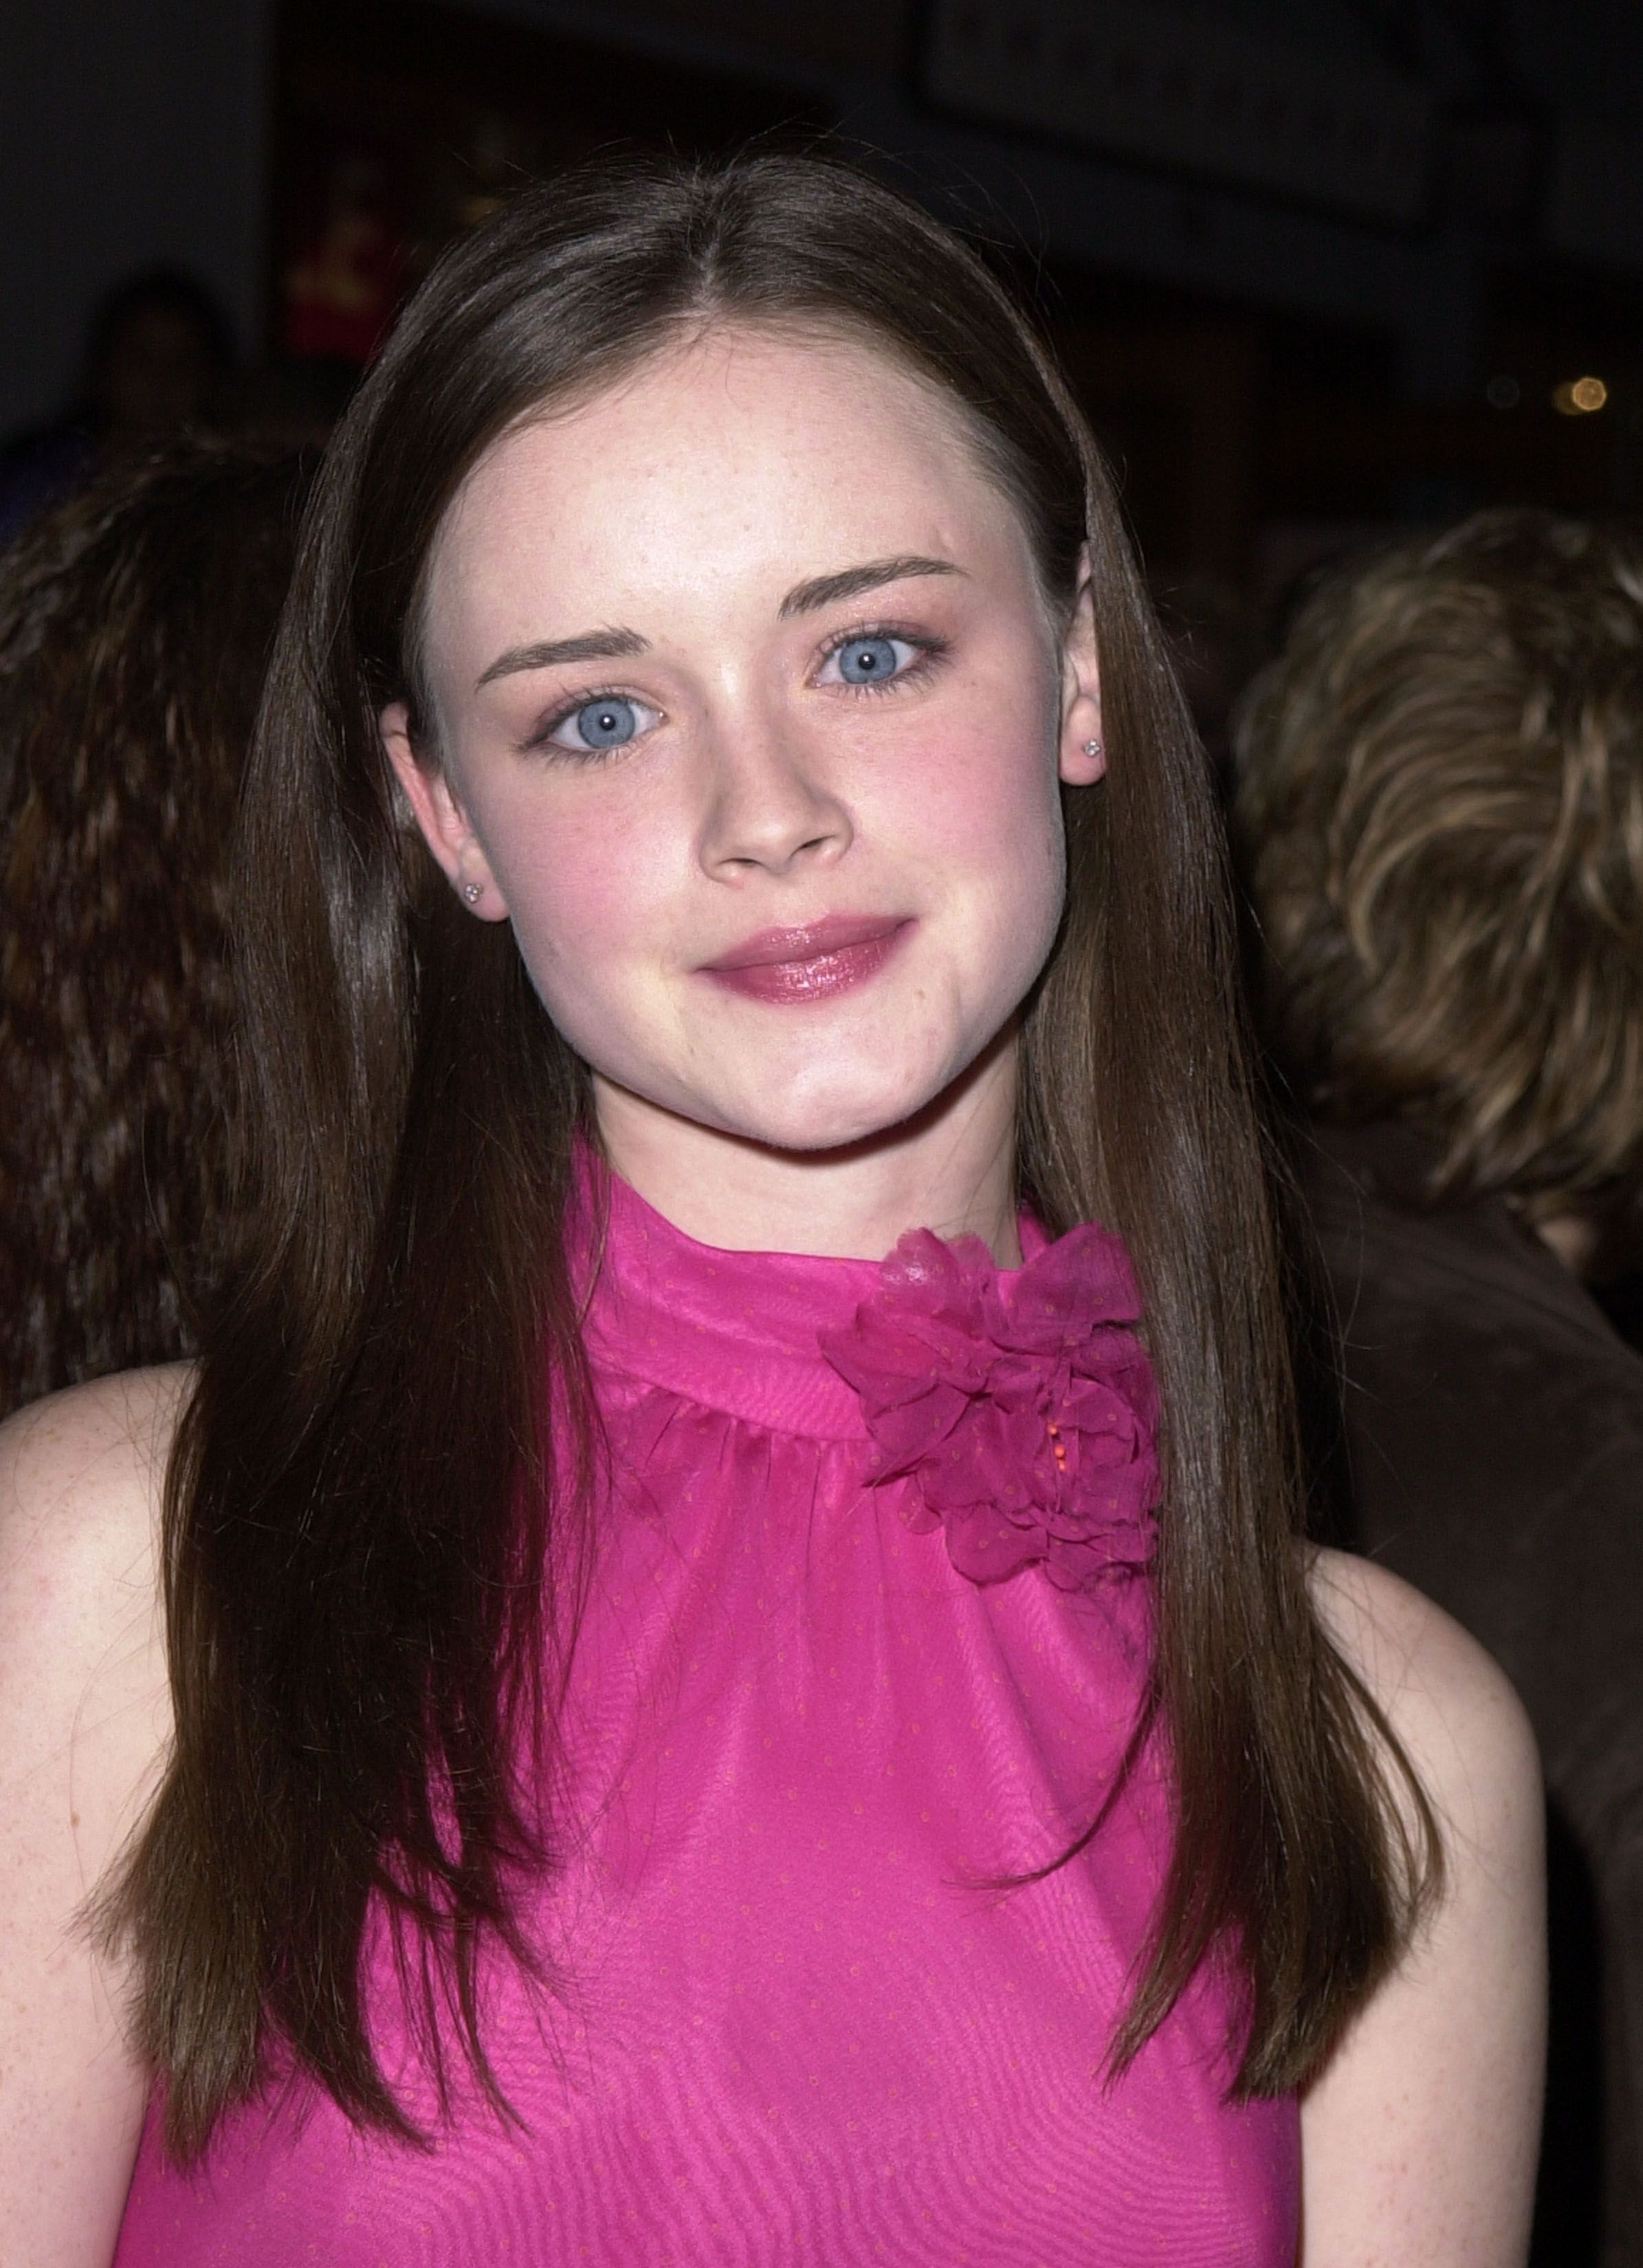 PHOTOS: 'Gilmore Girls' Stars: Where Are They Now Years Later?